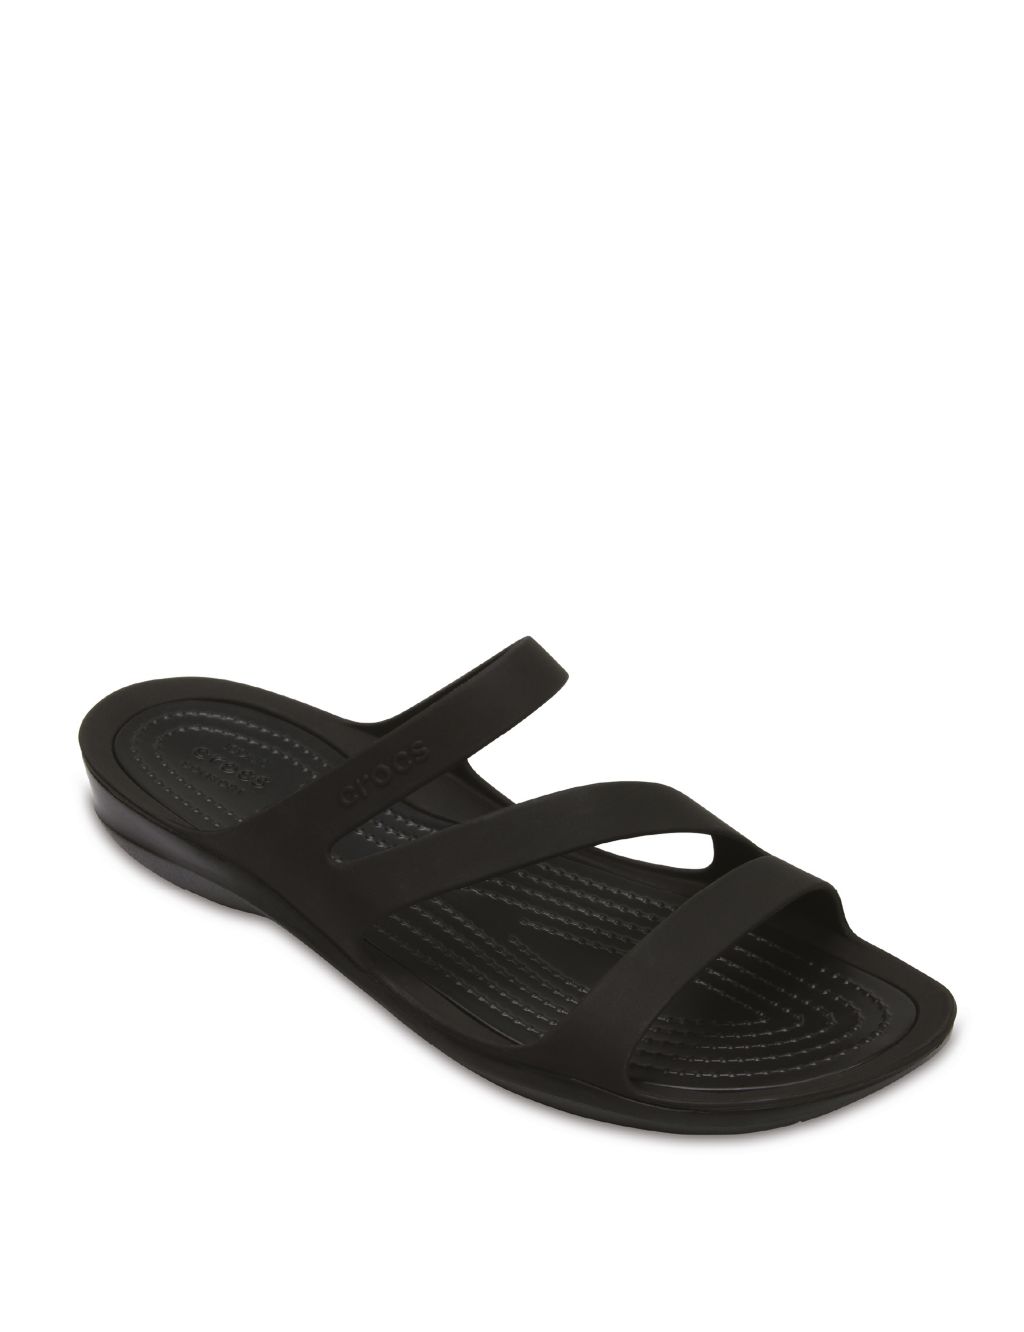 Swiftwater™ Strappy Sliders image 2